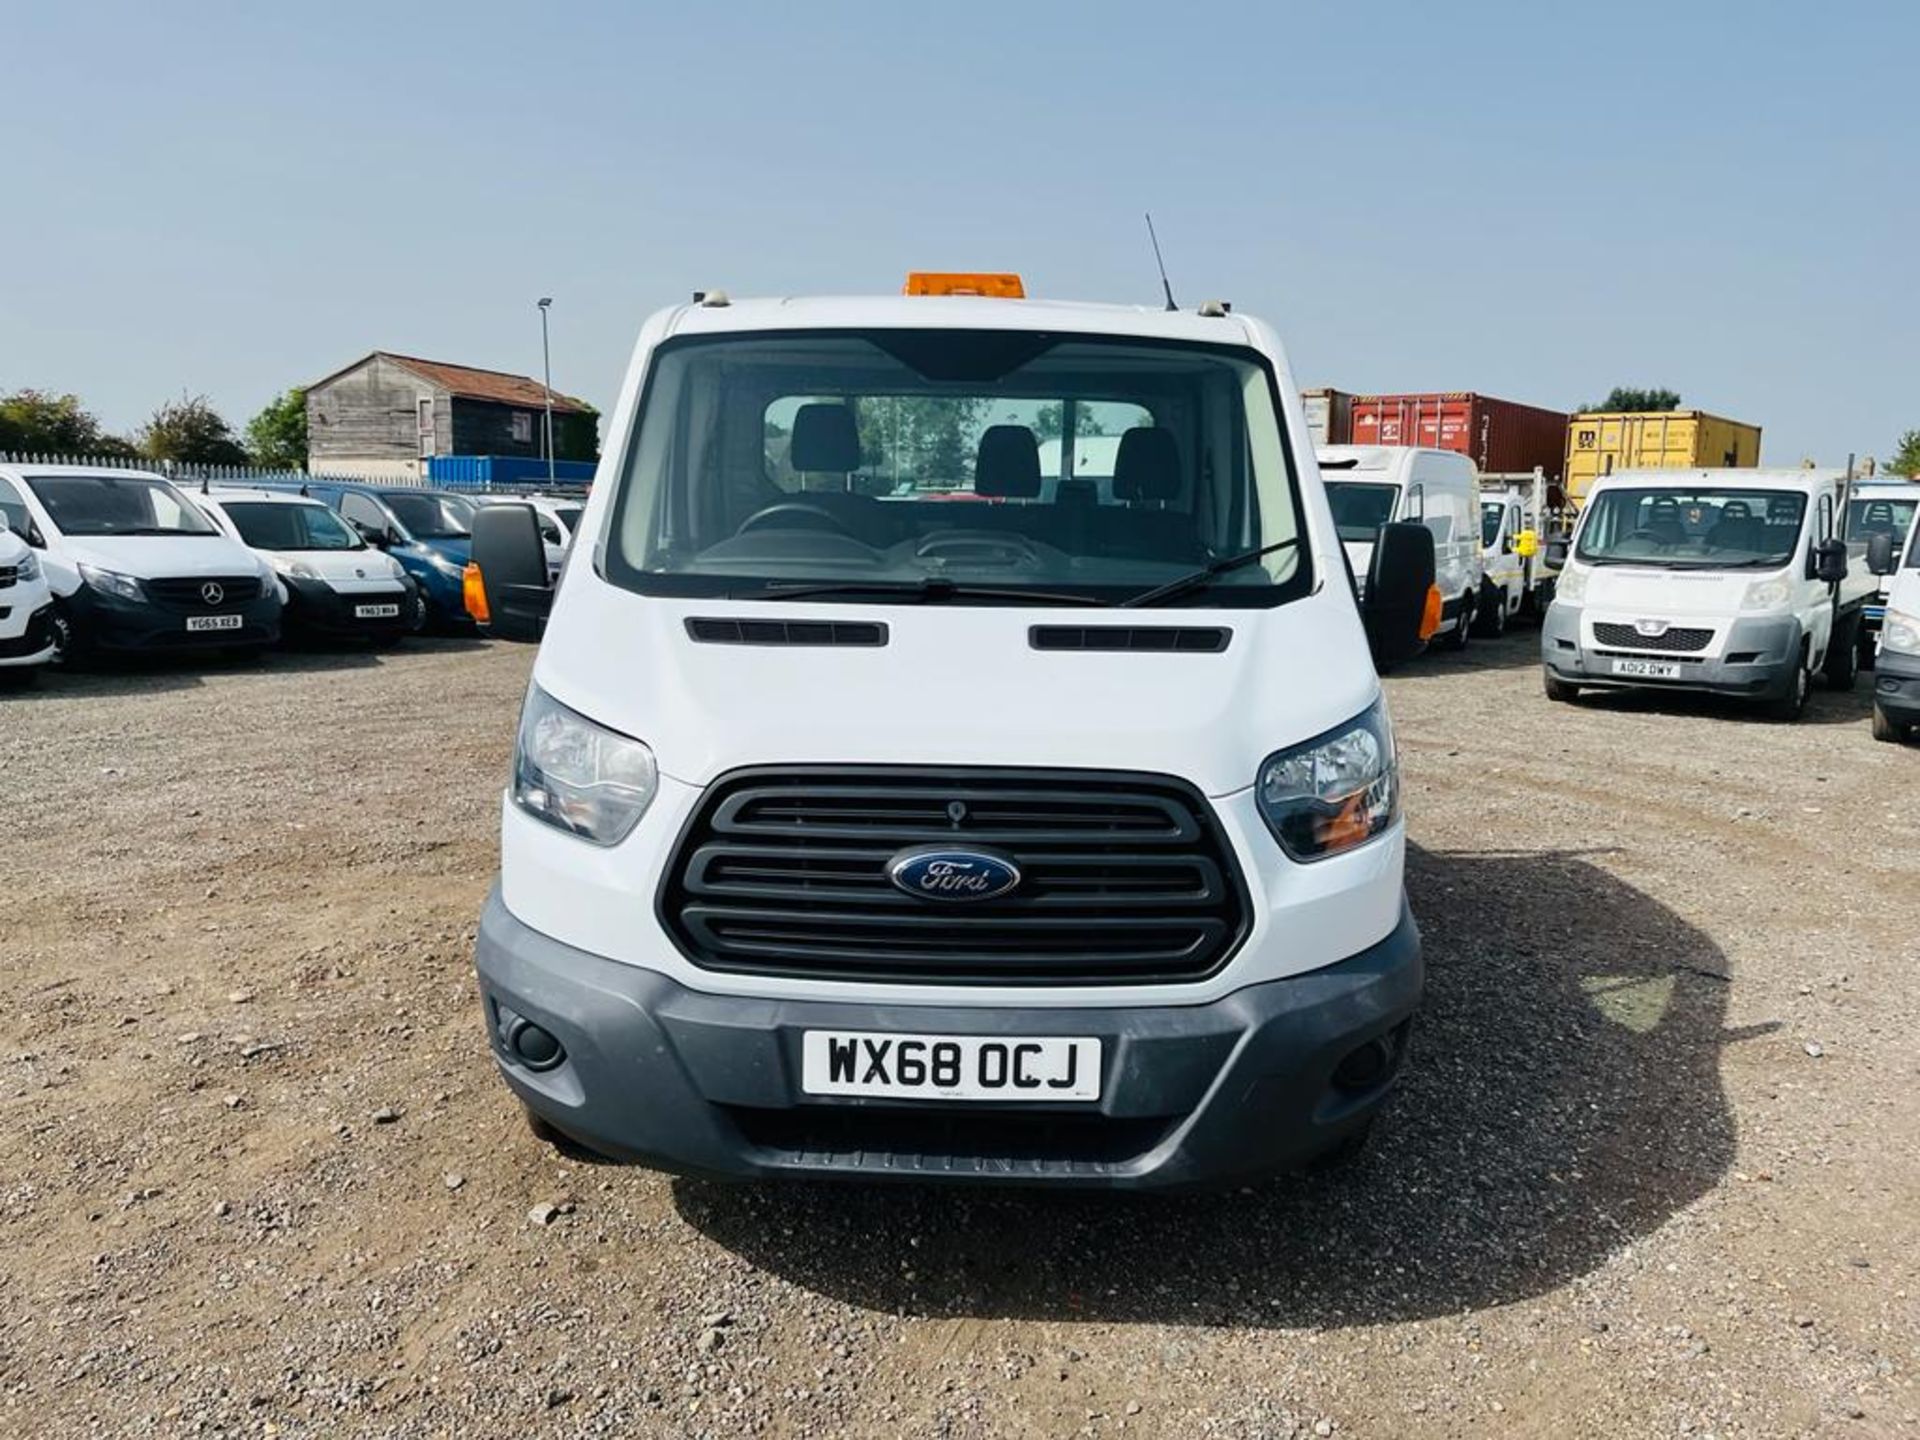 ** ON SALE **Ford Transit Chassis Cab 350 RWD 2.0 TDCI 130 2018 '68 Reg' - Tow Bar - Long Wheel Base - Image 3 of 35